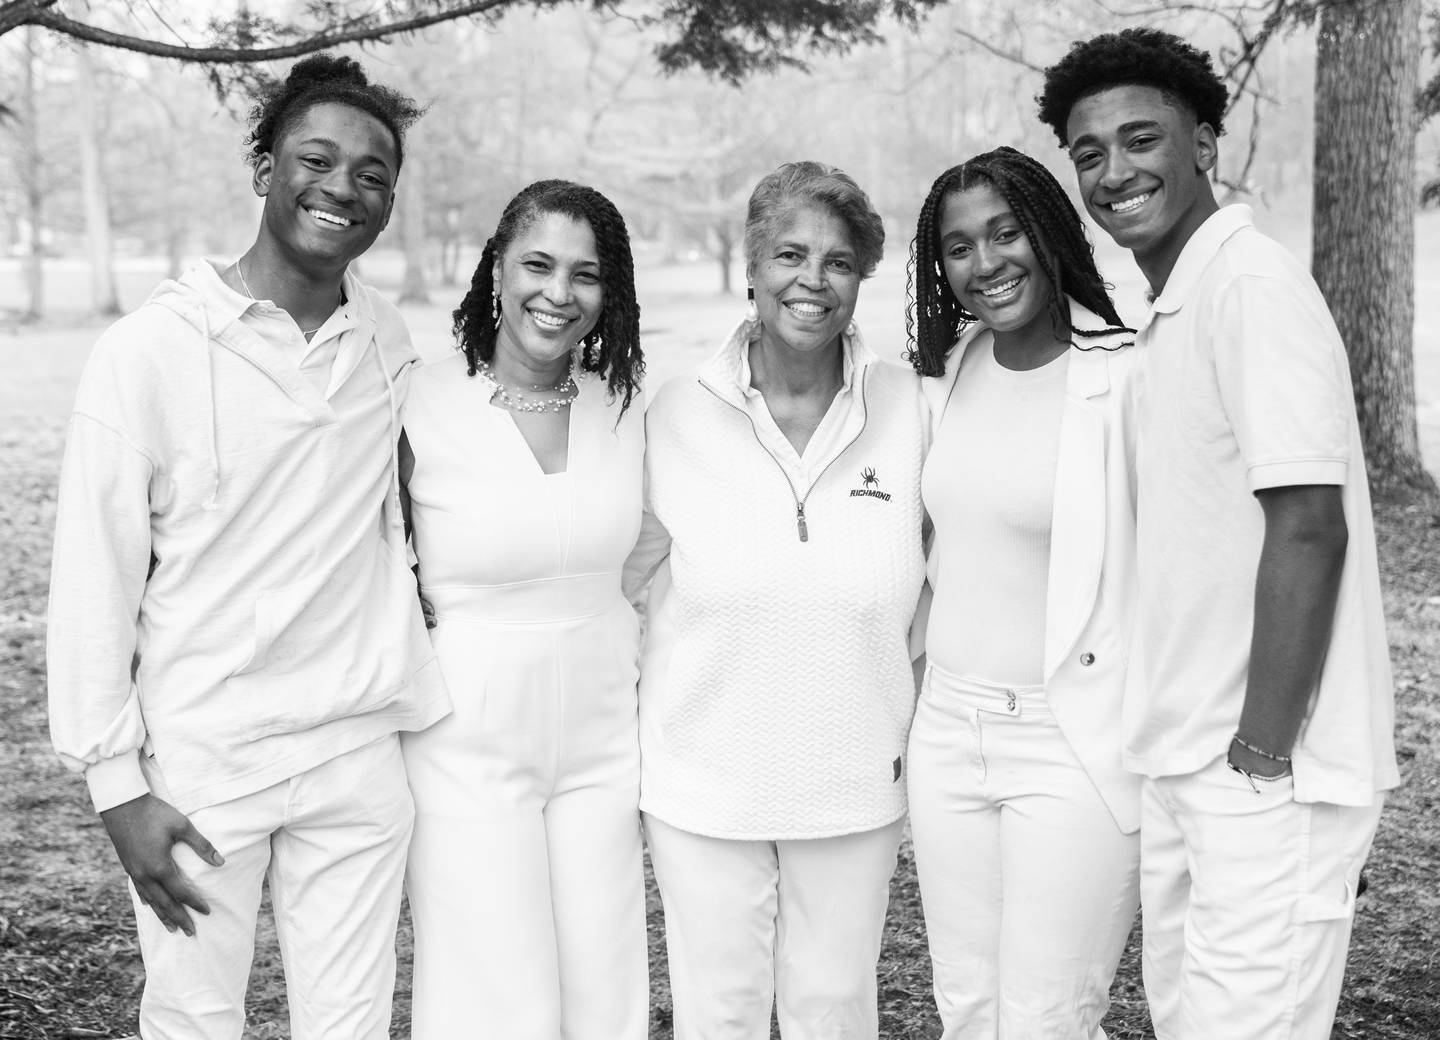 Kai Hammond, Dr. Camille Hammond, Dr. Tinina Cade, Simone Hammond and Aaron Hammond all poses together for a portrait outside their home in Reisterstown, March 25, 2023.